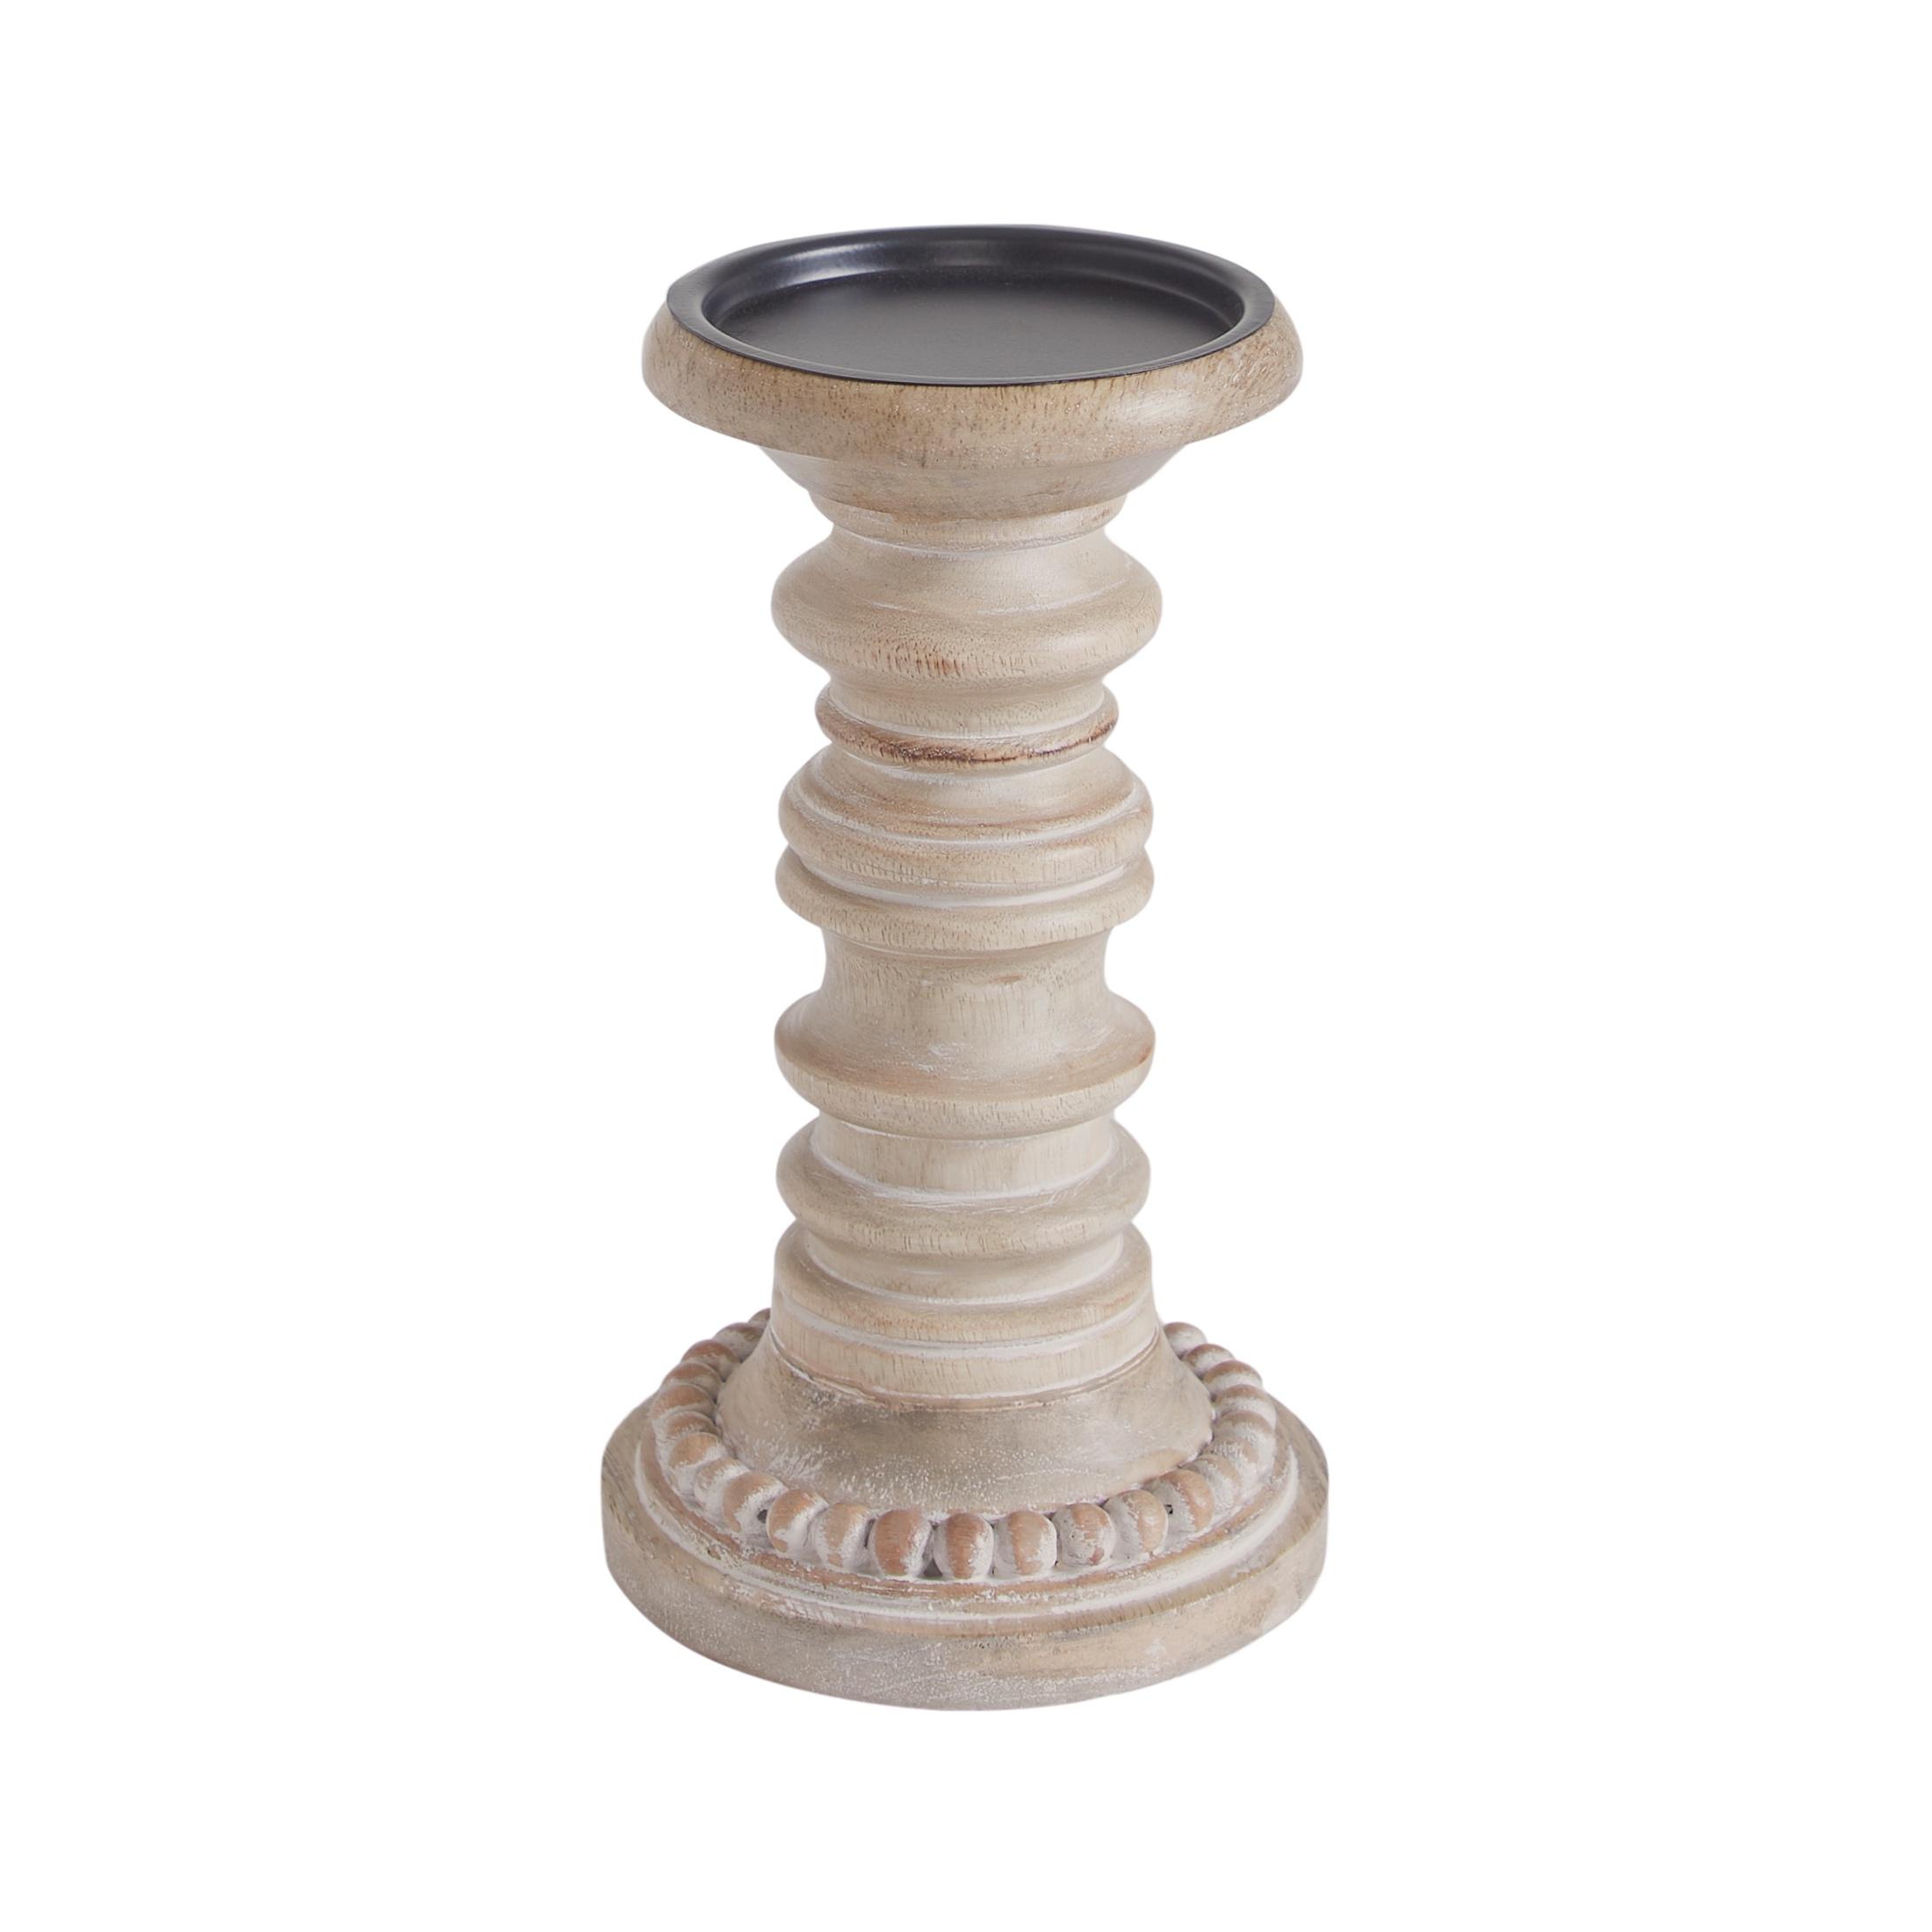 My Texas House Natural Mango Wood Pedestal Candle Holder, 8" Height - image 1 of 5